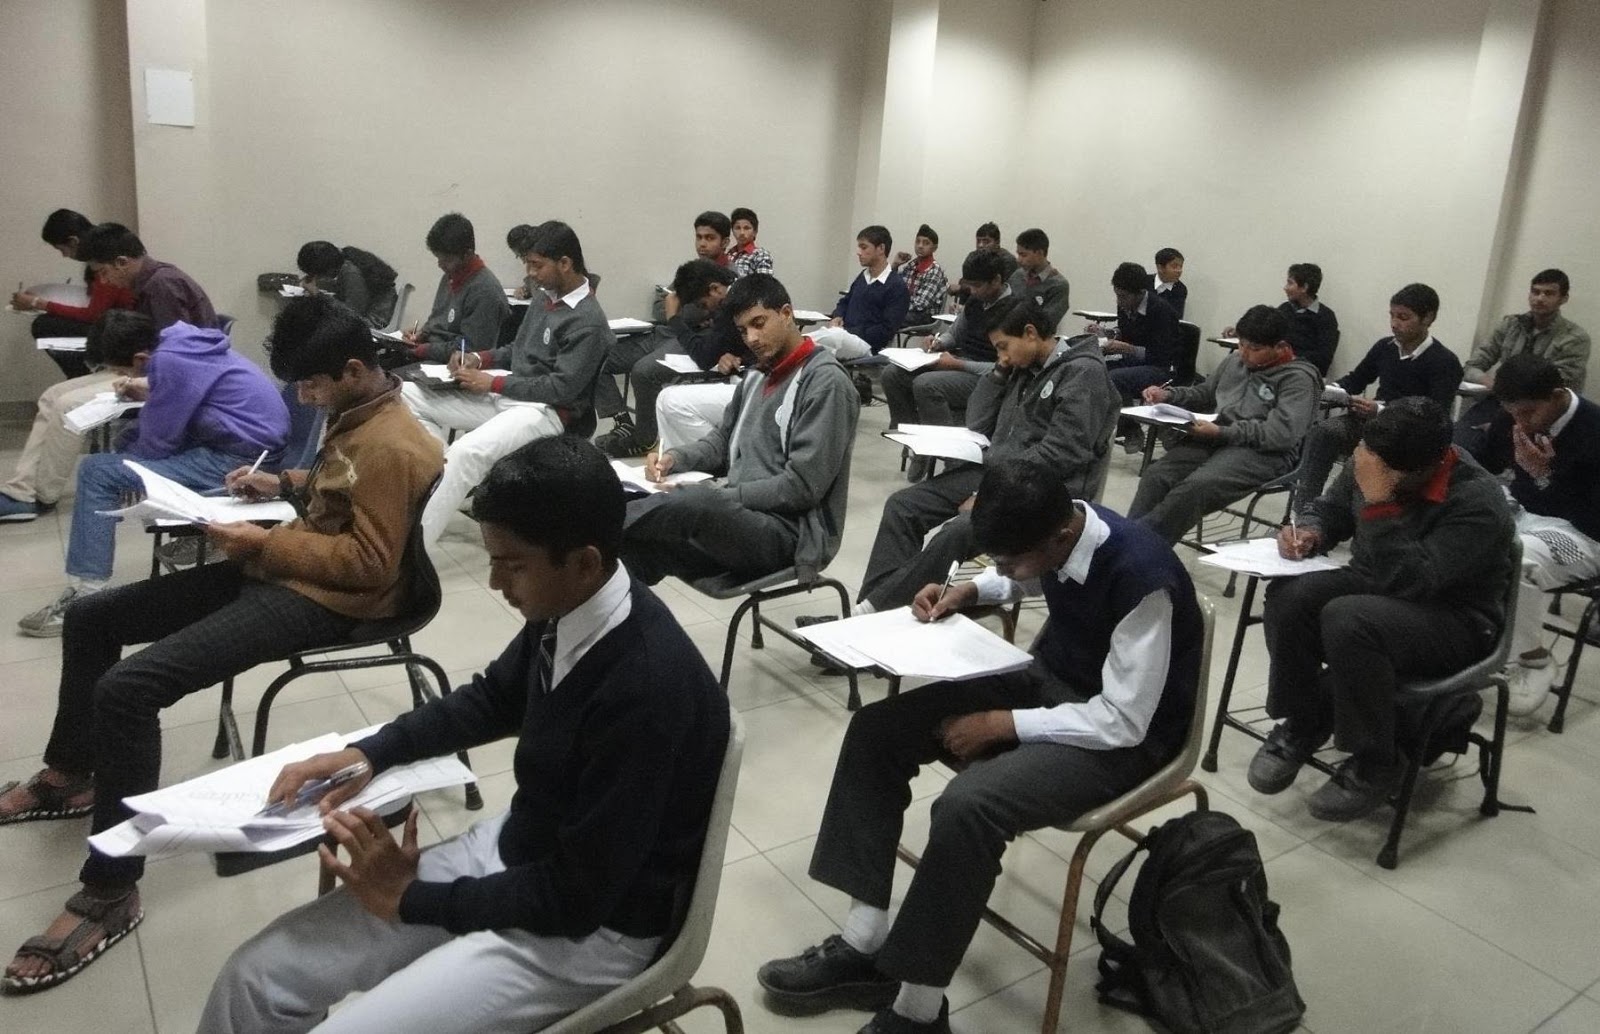 Law Entrance Examinations In India